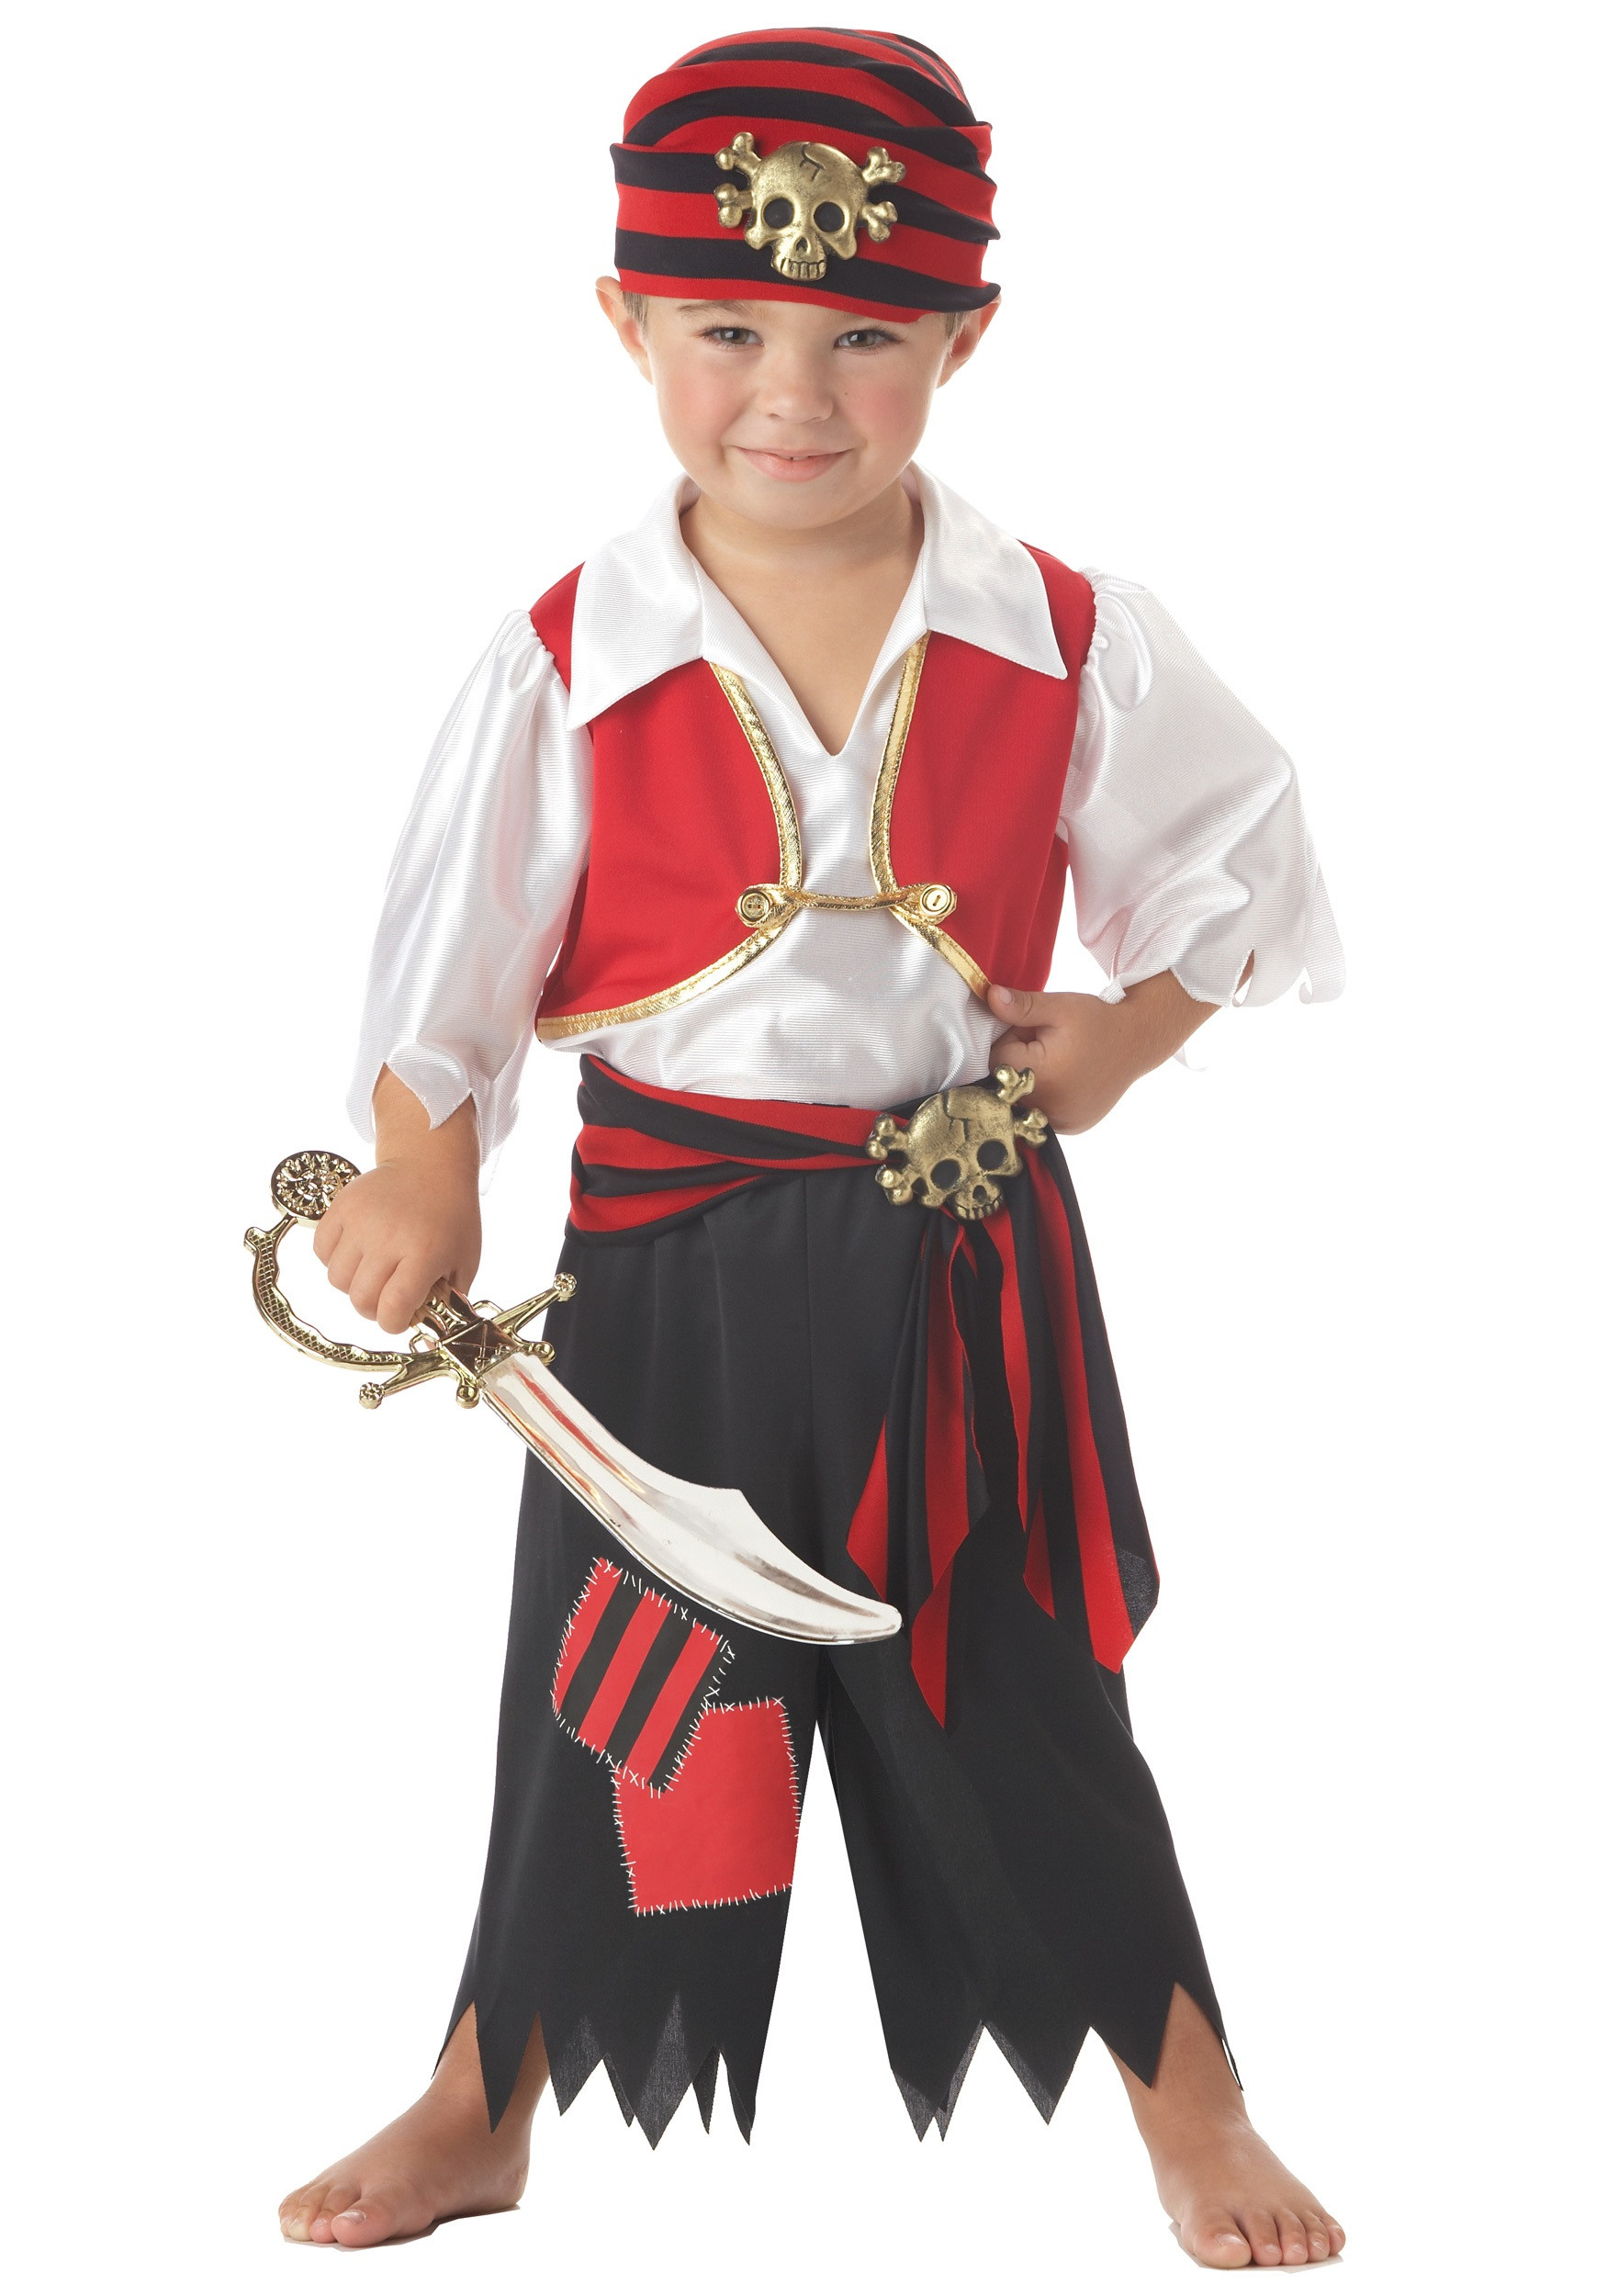 DIY Pirate Costumes For Kids
 Toddler Ahoy Matey Pirate Costume